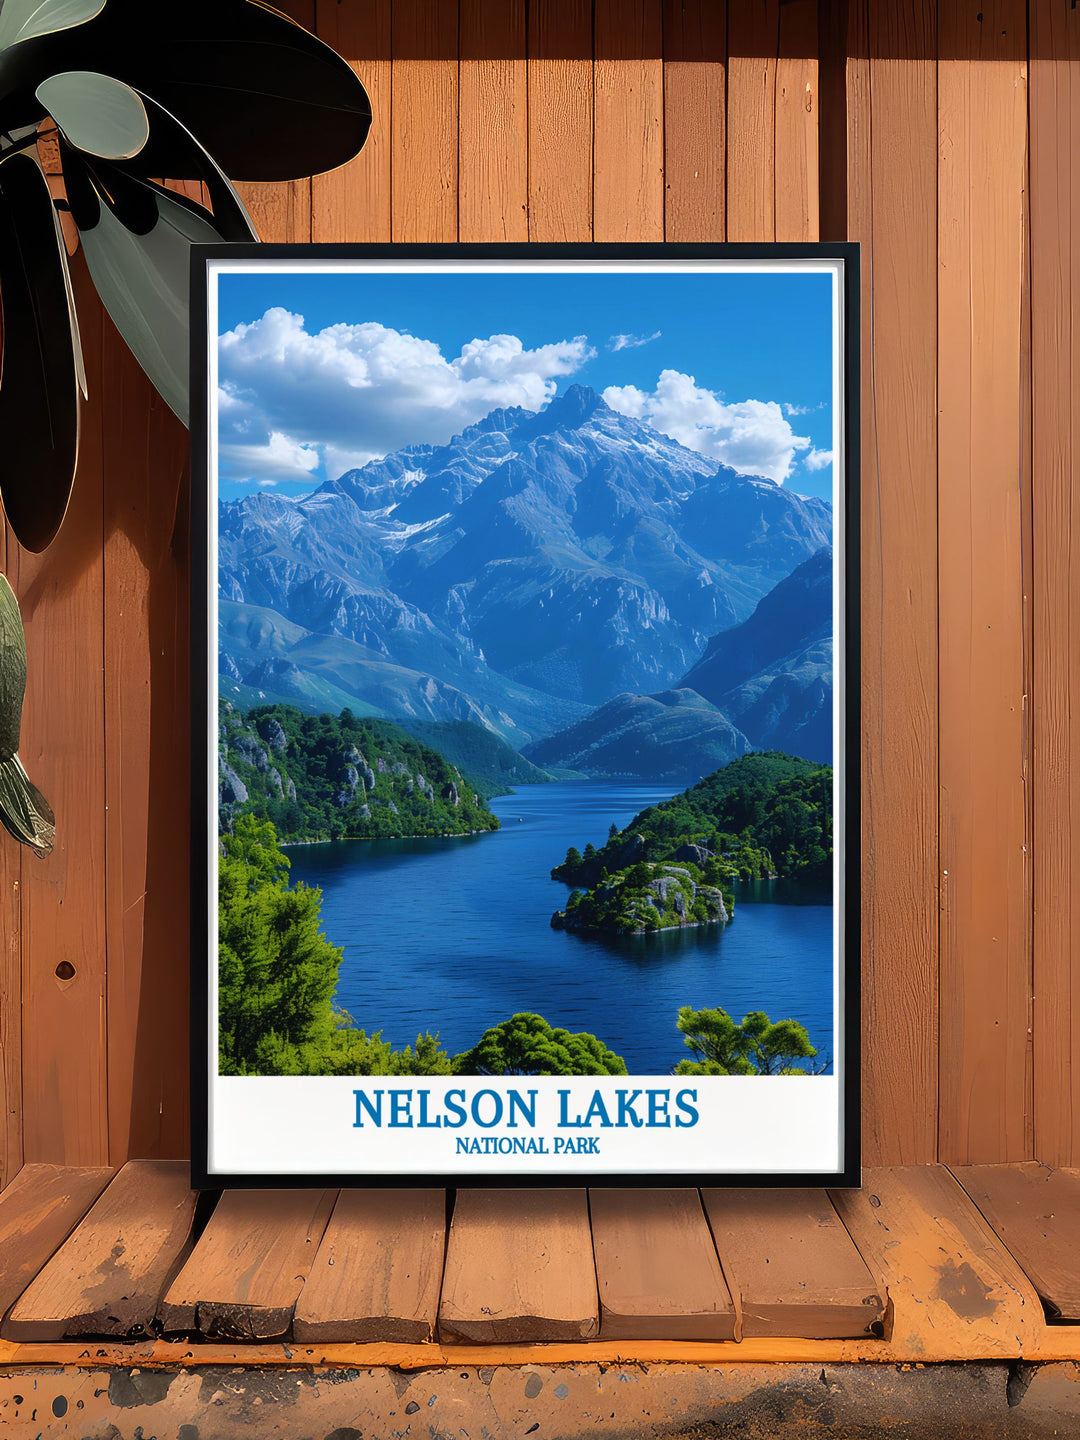 Exquisite Lake Rotoiti calm waters and scenic views home decor piece capturing the pristine beauty and tranquility of this South Island destination perfect for adding a touch of natural elegance to any room in your home.